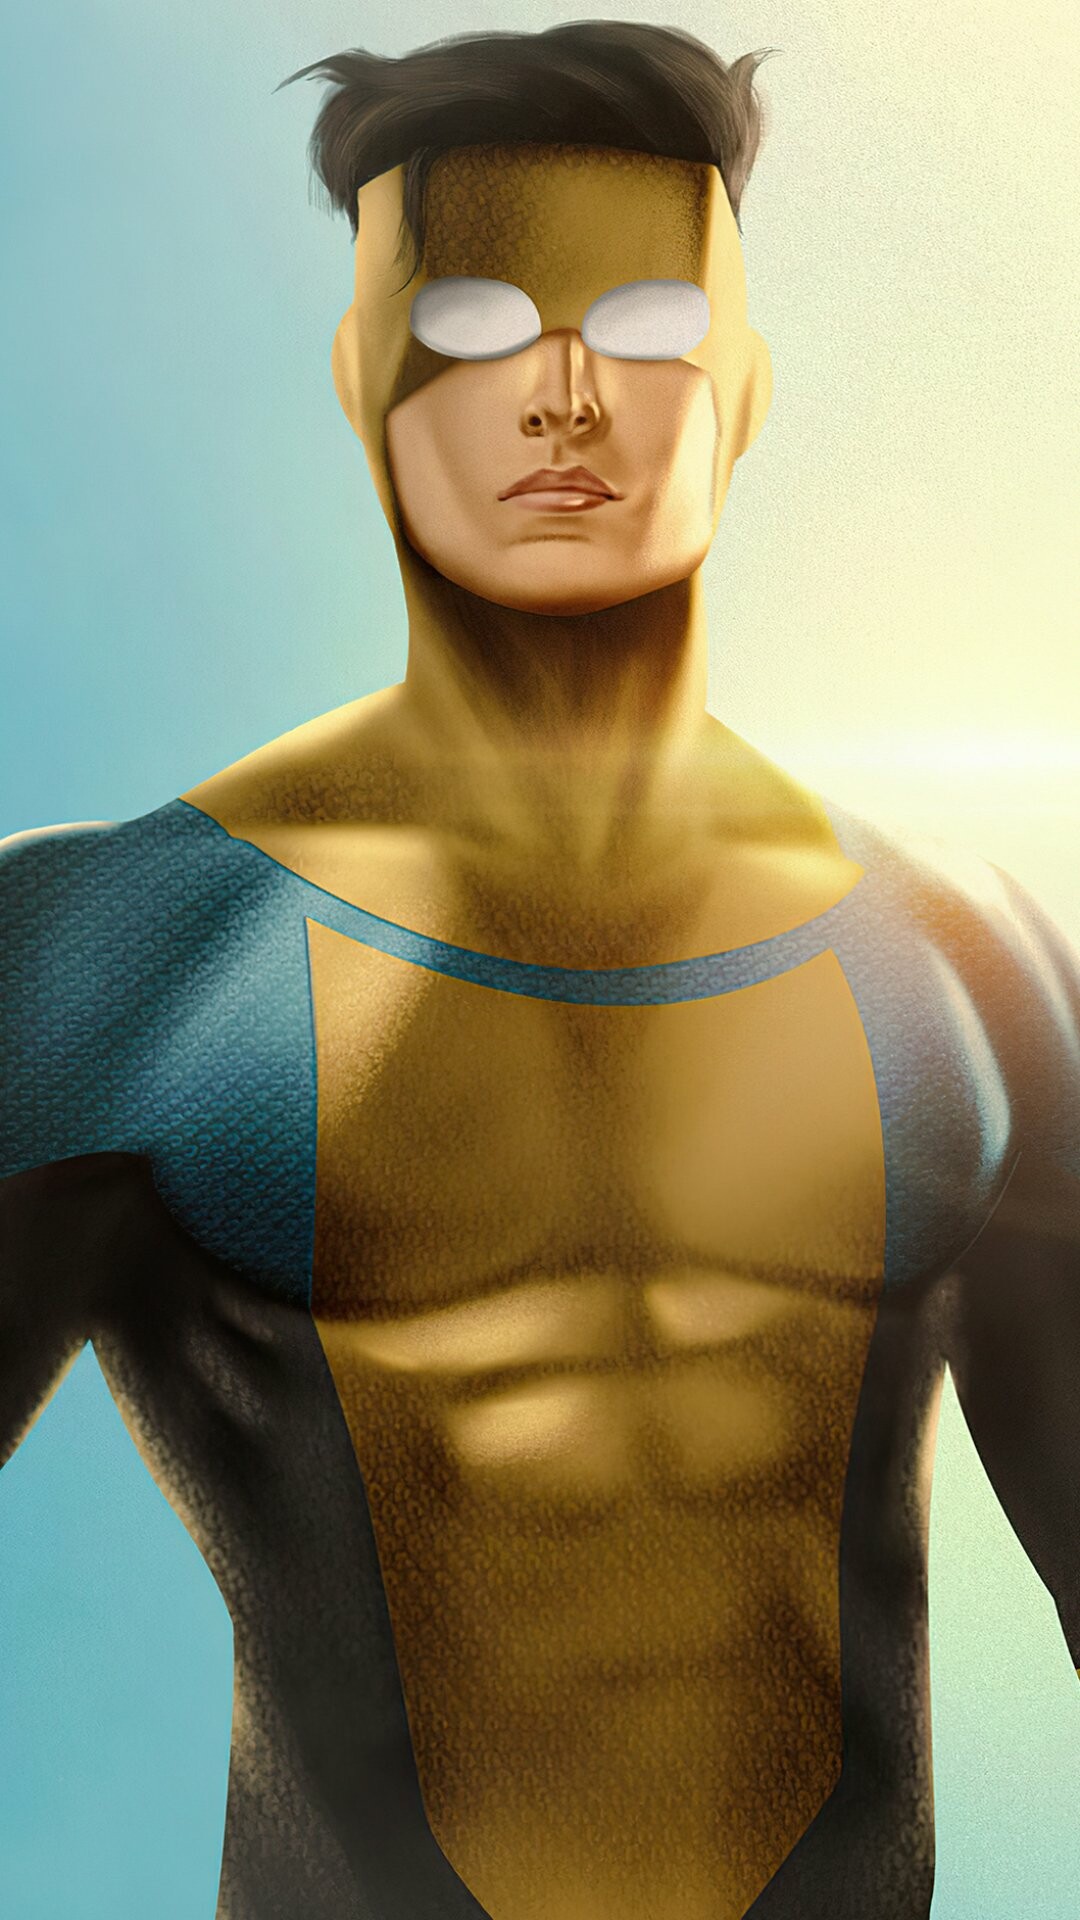 Invincible, Action-packed animation, Superhero origins, Battle for justice, 1080x1920 Full HD Phone